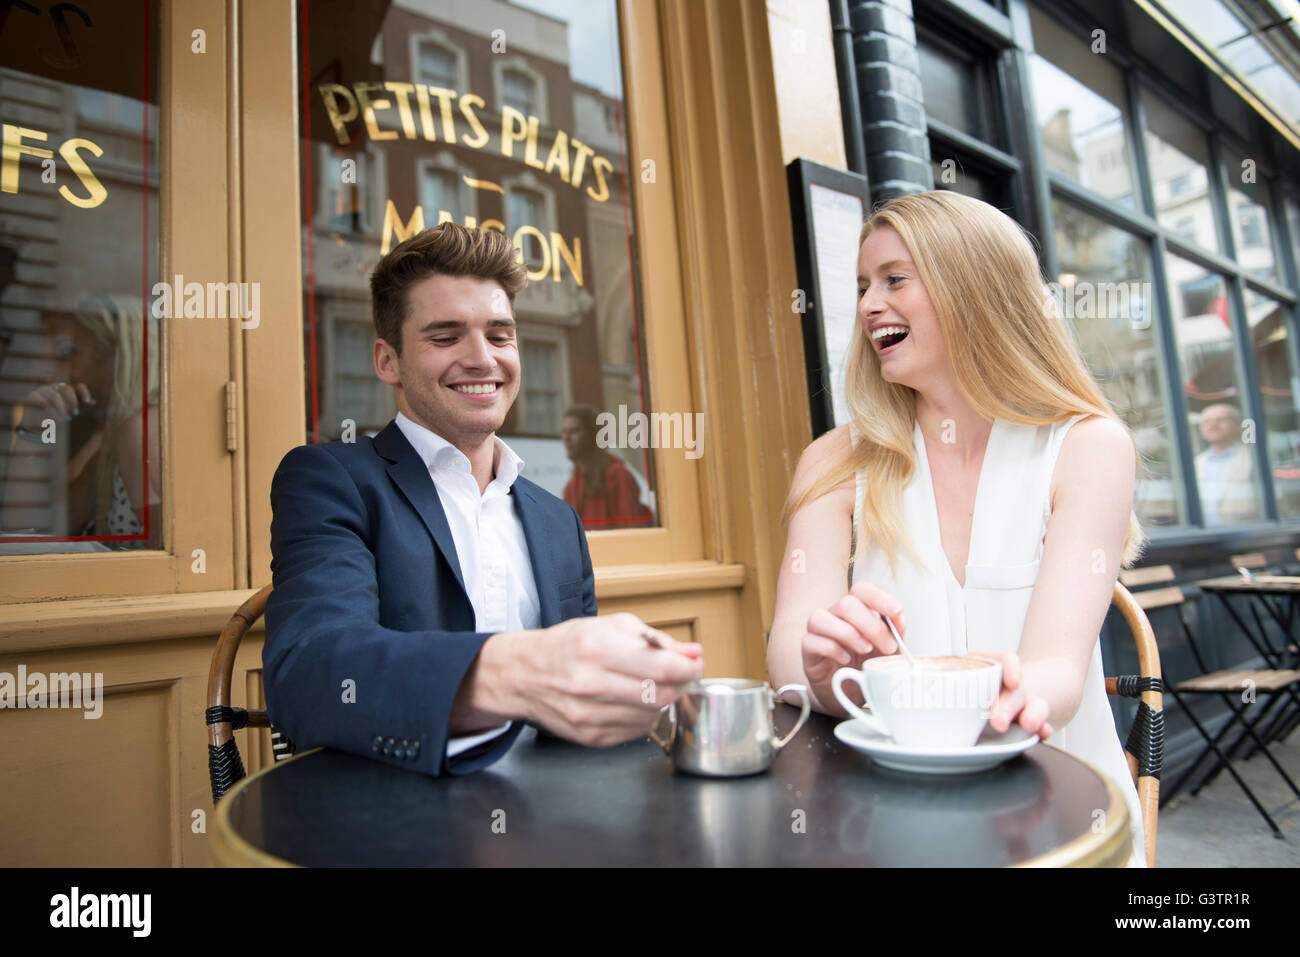 Two friends sitting outside a cafe in Covent Garden in London. Stock Photo